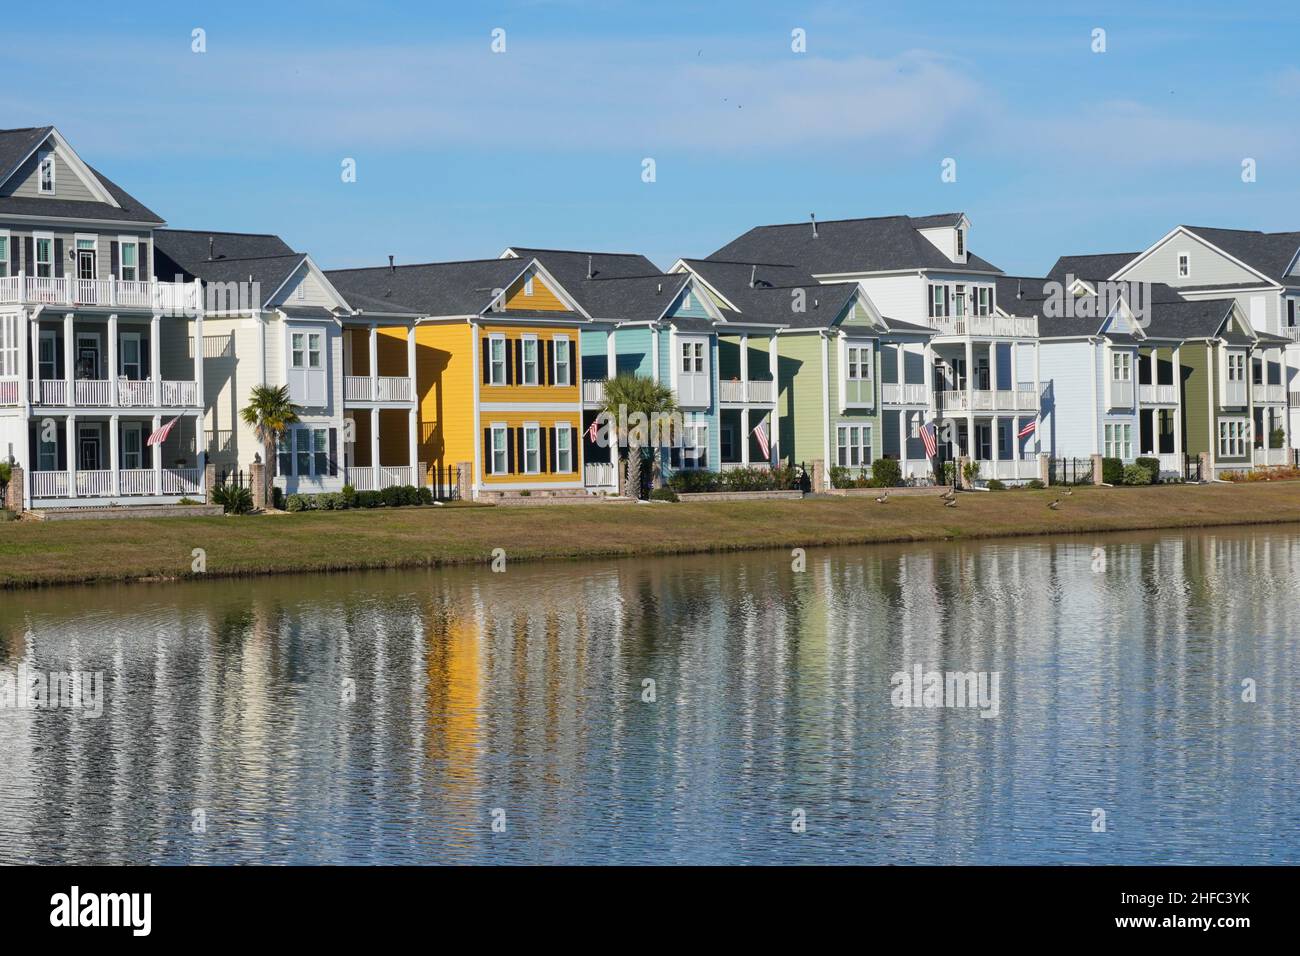 Brightly Colored Houses Reflected in a Pond in a Suburban Neighborhood in South Carolina Stock Photo